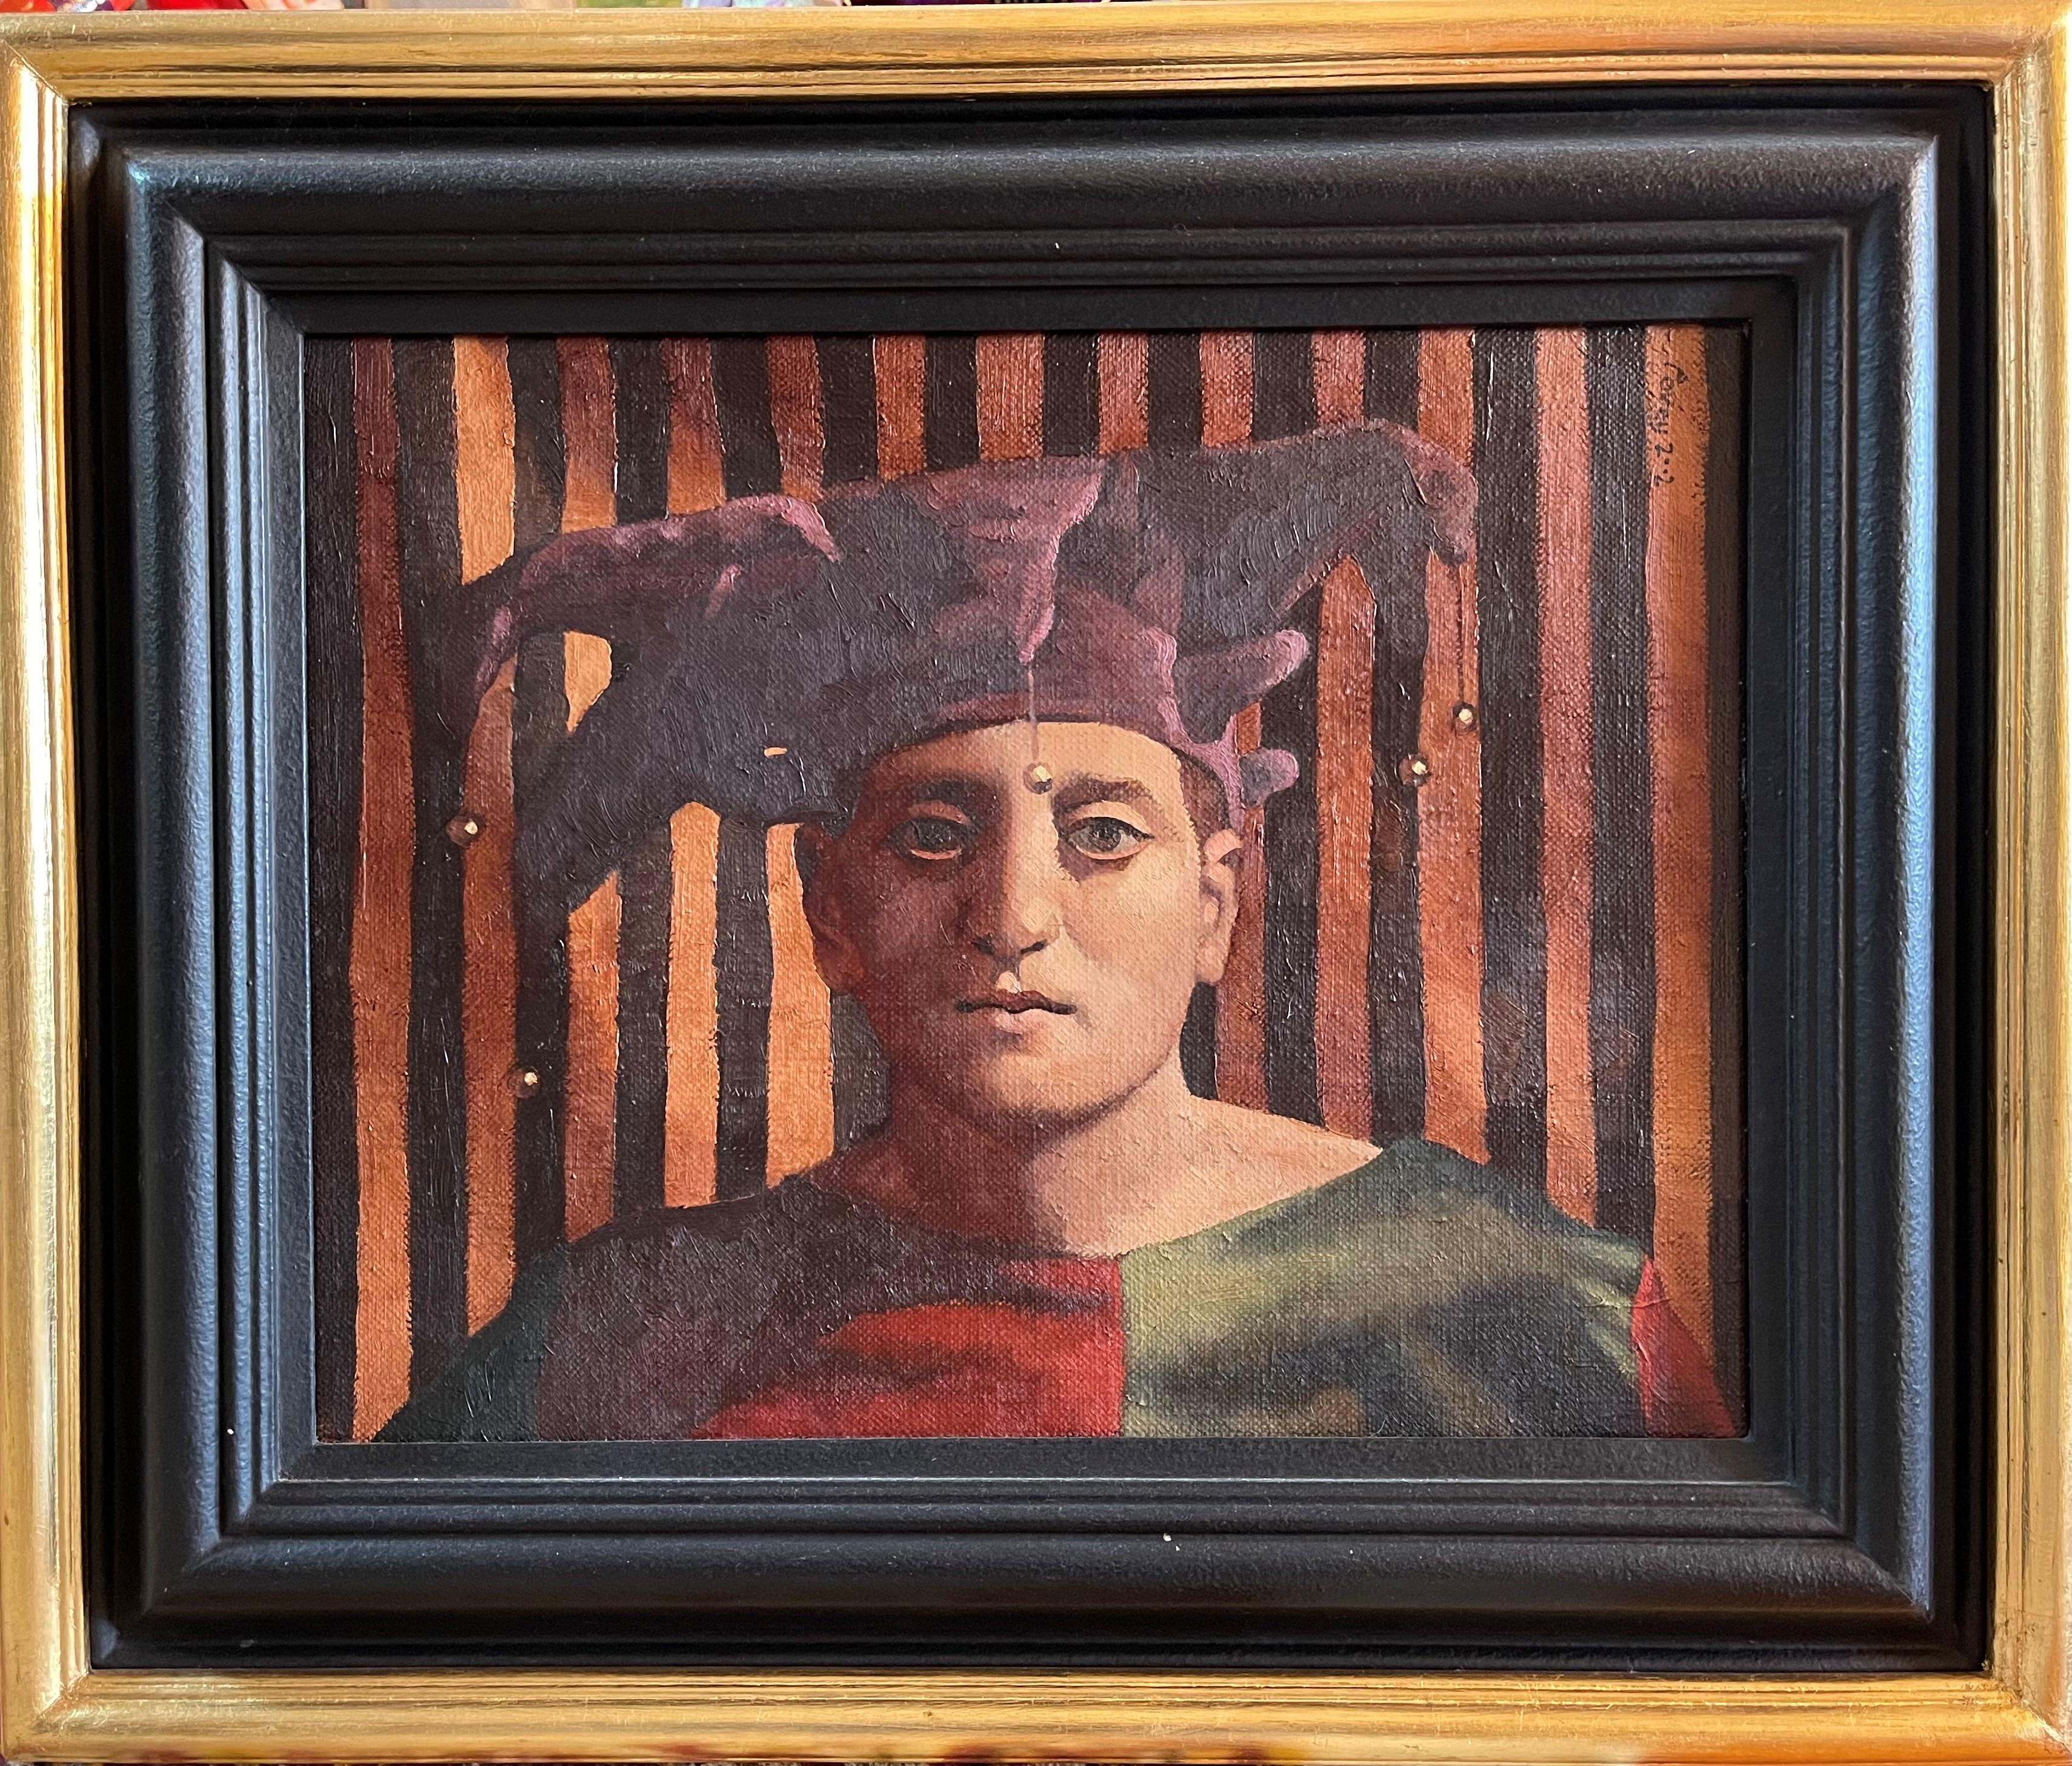  Insight, bust portrait of a Jester, 2002  - Painting by Edward Povey